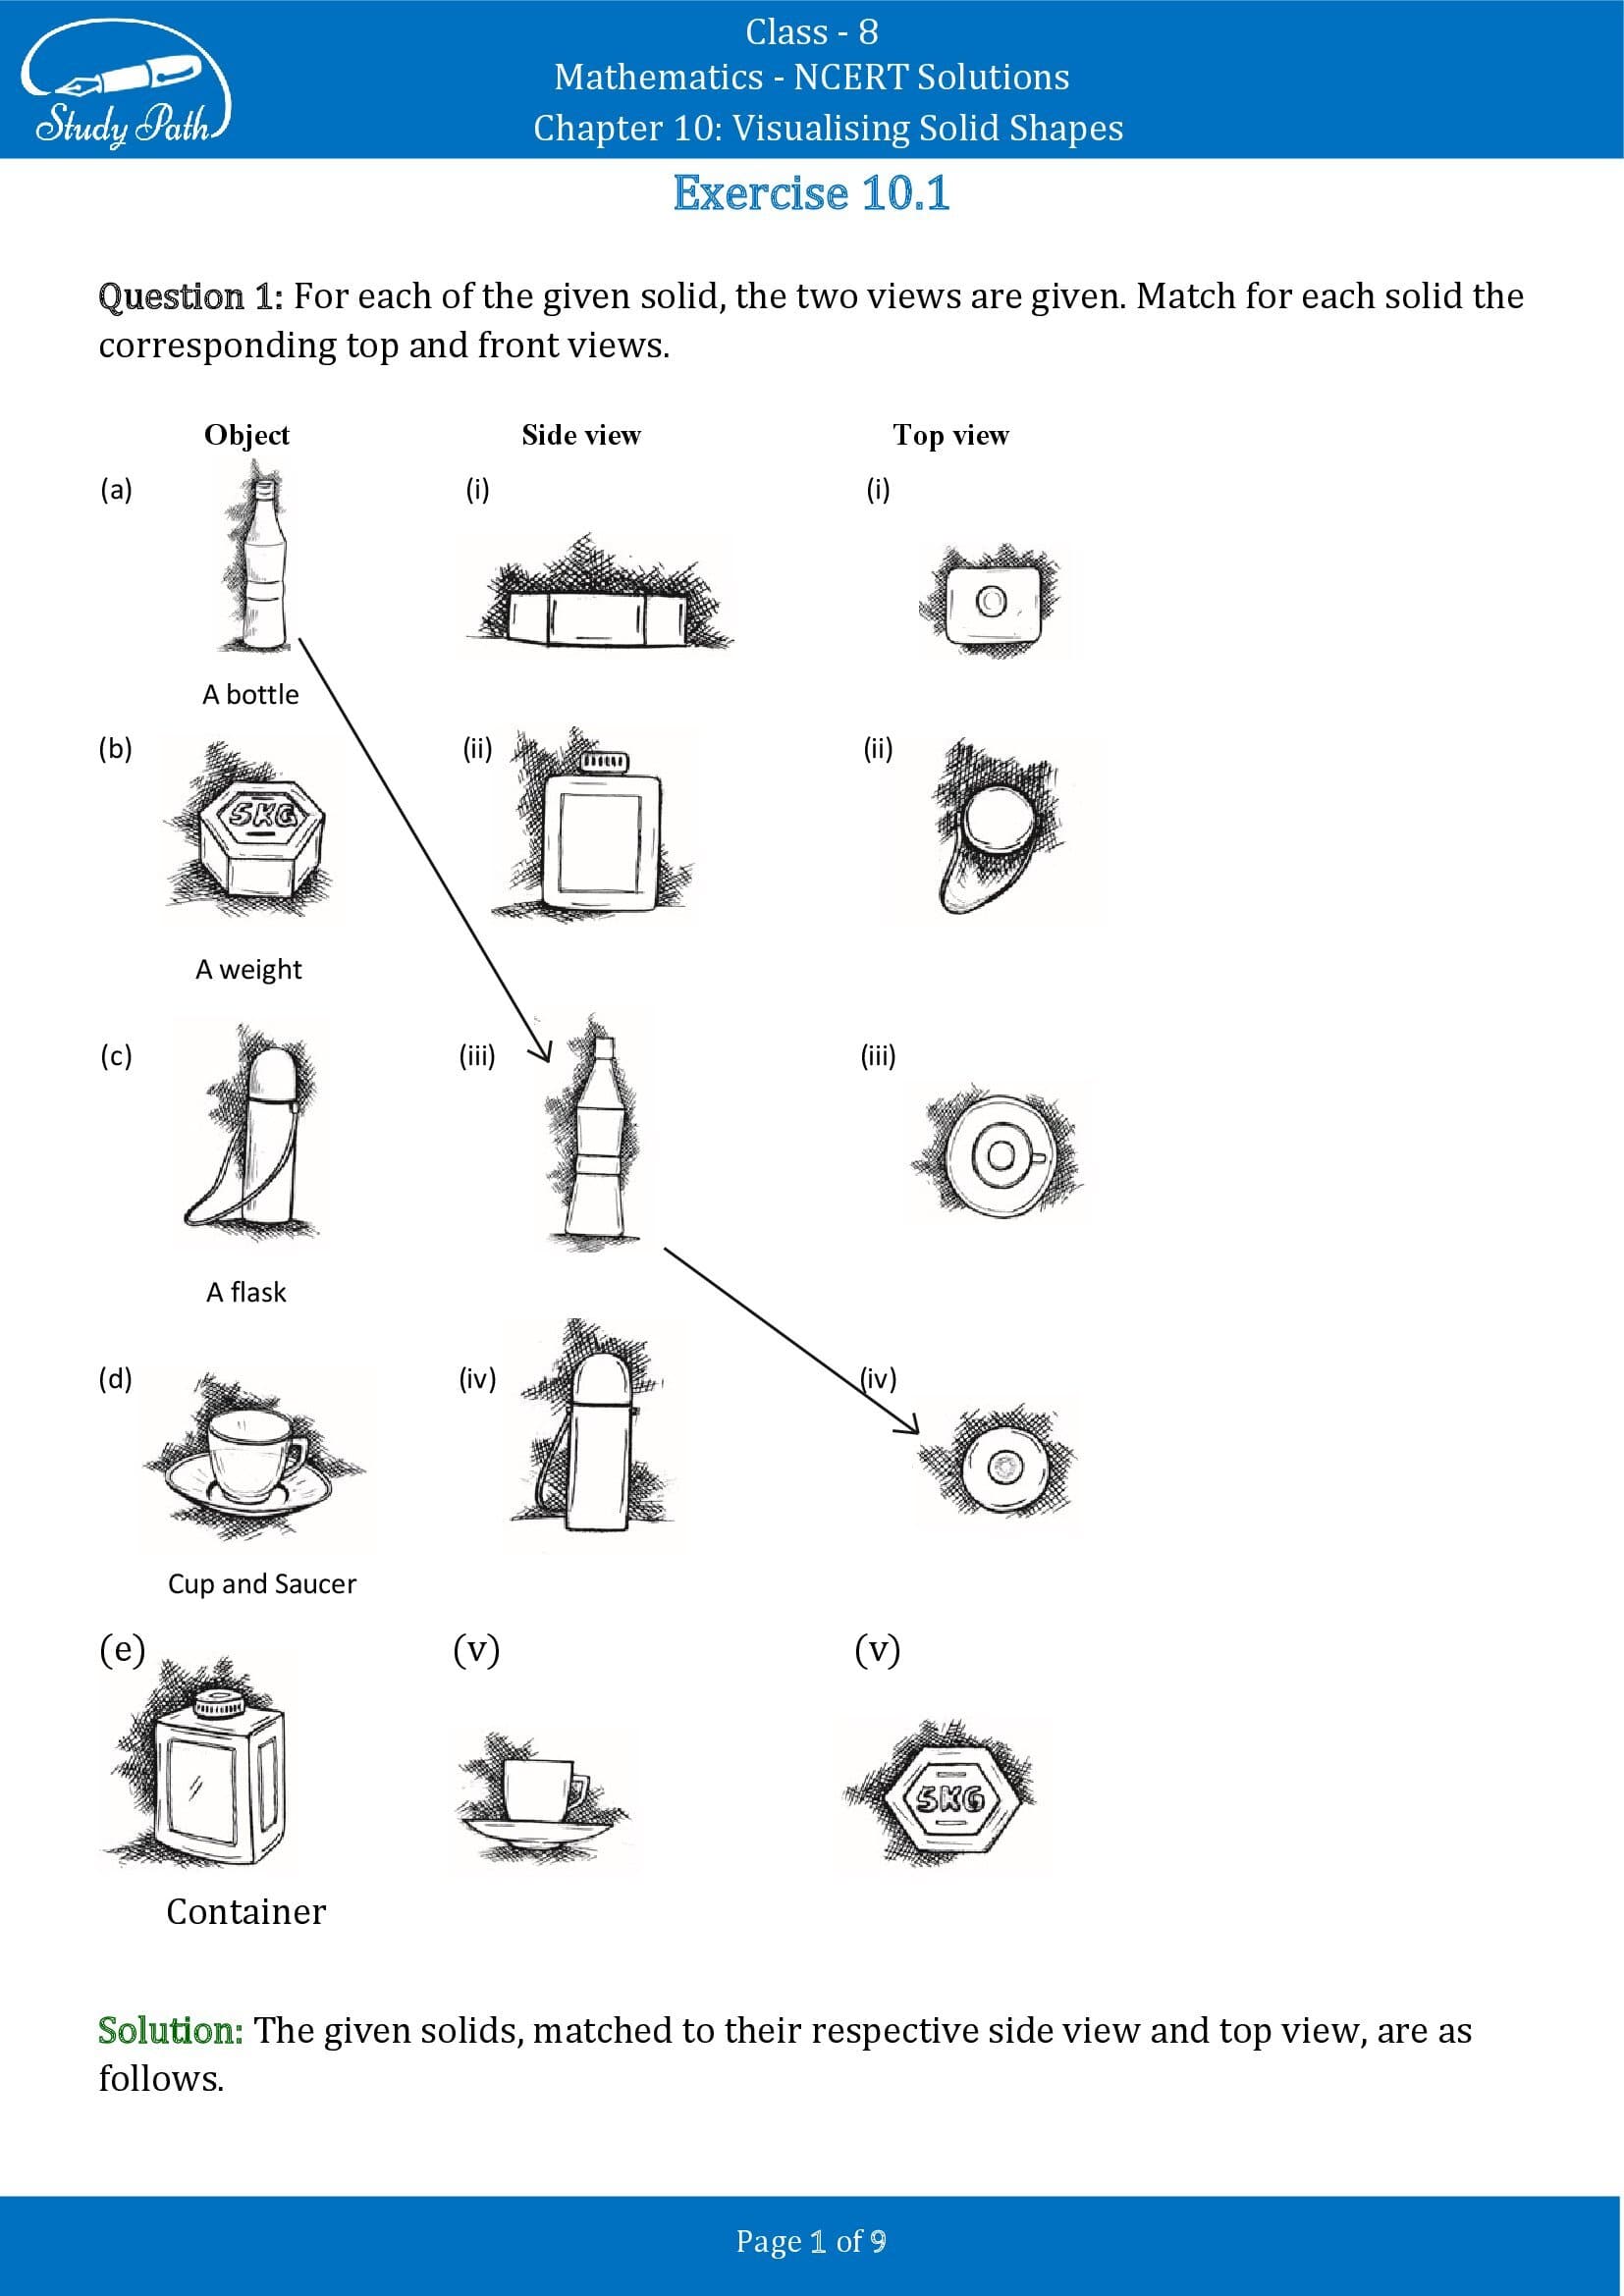 NCERT Solutions for Class 8 Maths Chapter 10 Visualising Solid Shapes Exercise 10.1 00001